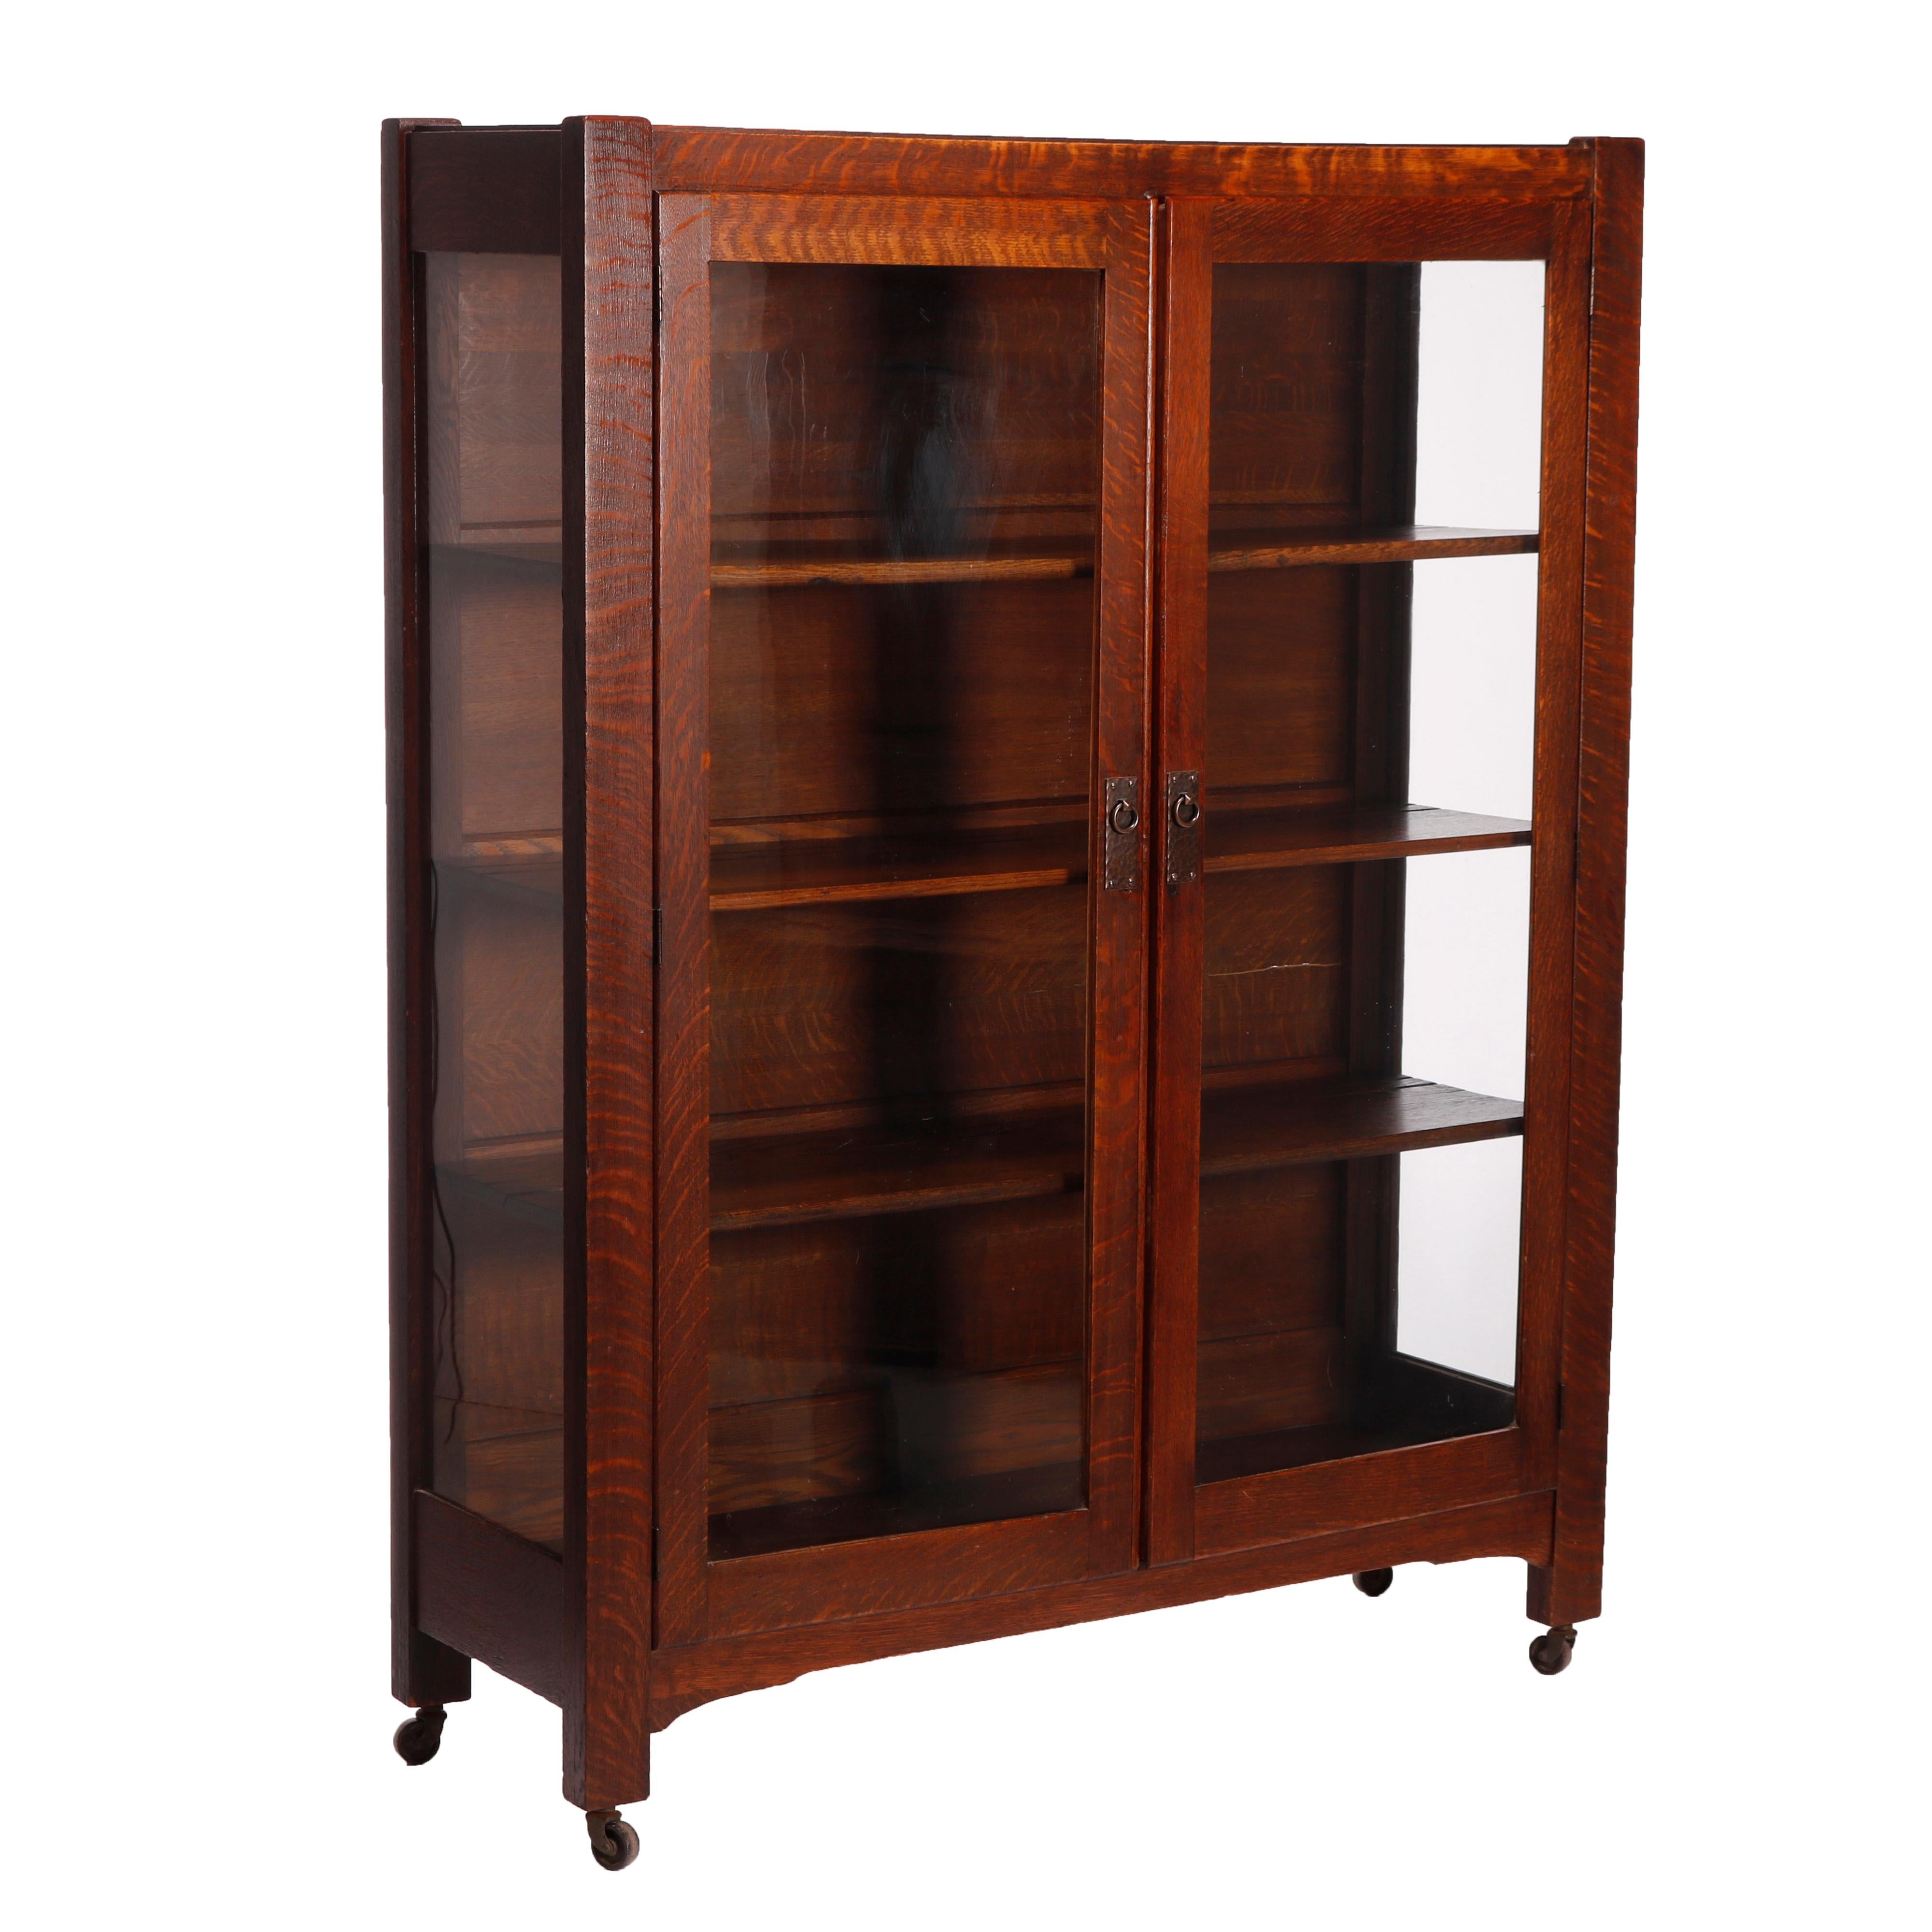 An antique Arts & Crafts Mission china cabinet in the manner of Stickley Bros. 
offers paneled quarter sawn oak construction with double glass doors opening to shelved interior, raised on straight square legs with casters, c1910

Measures -